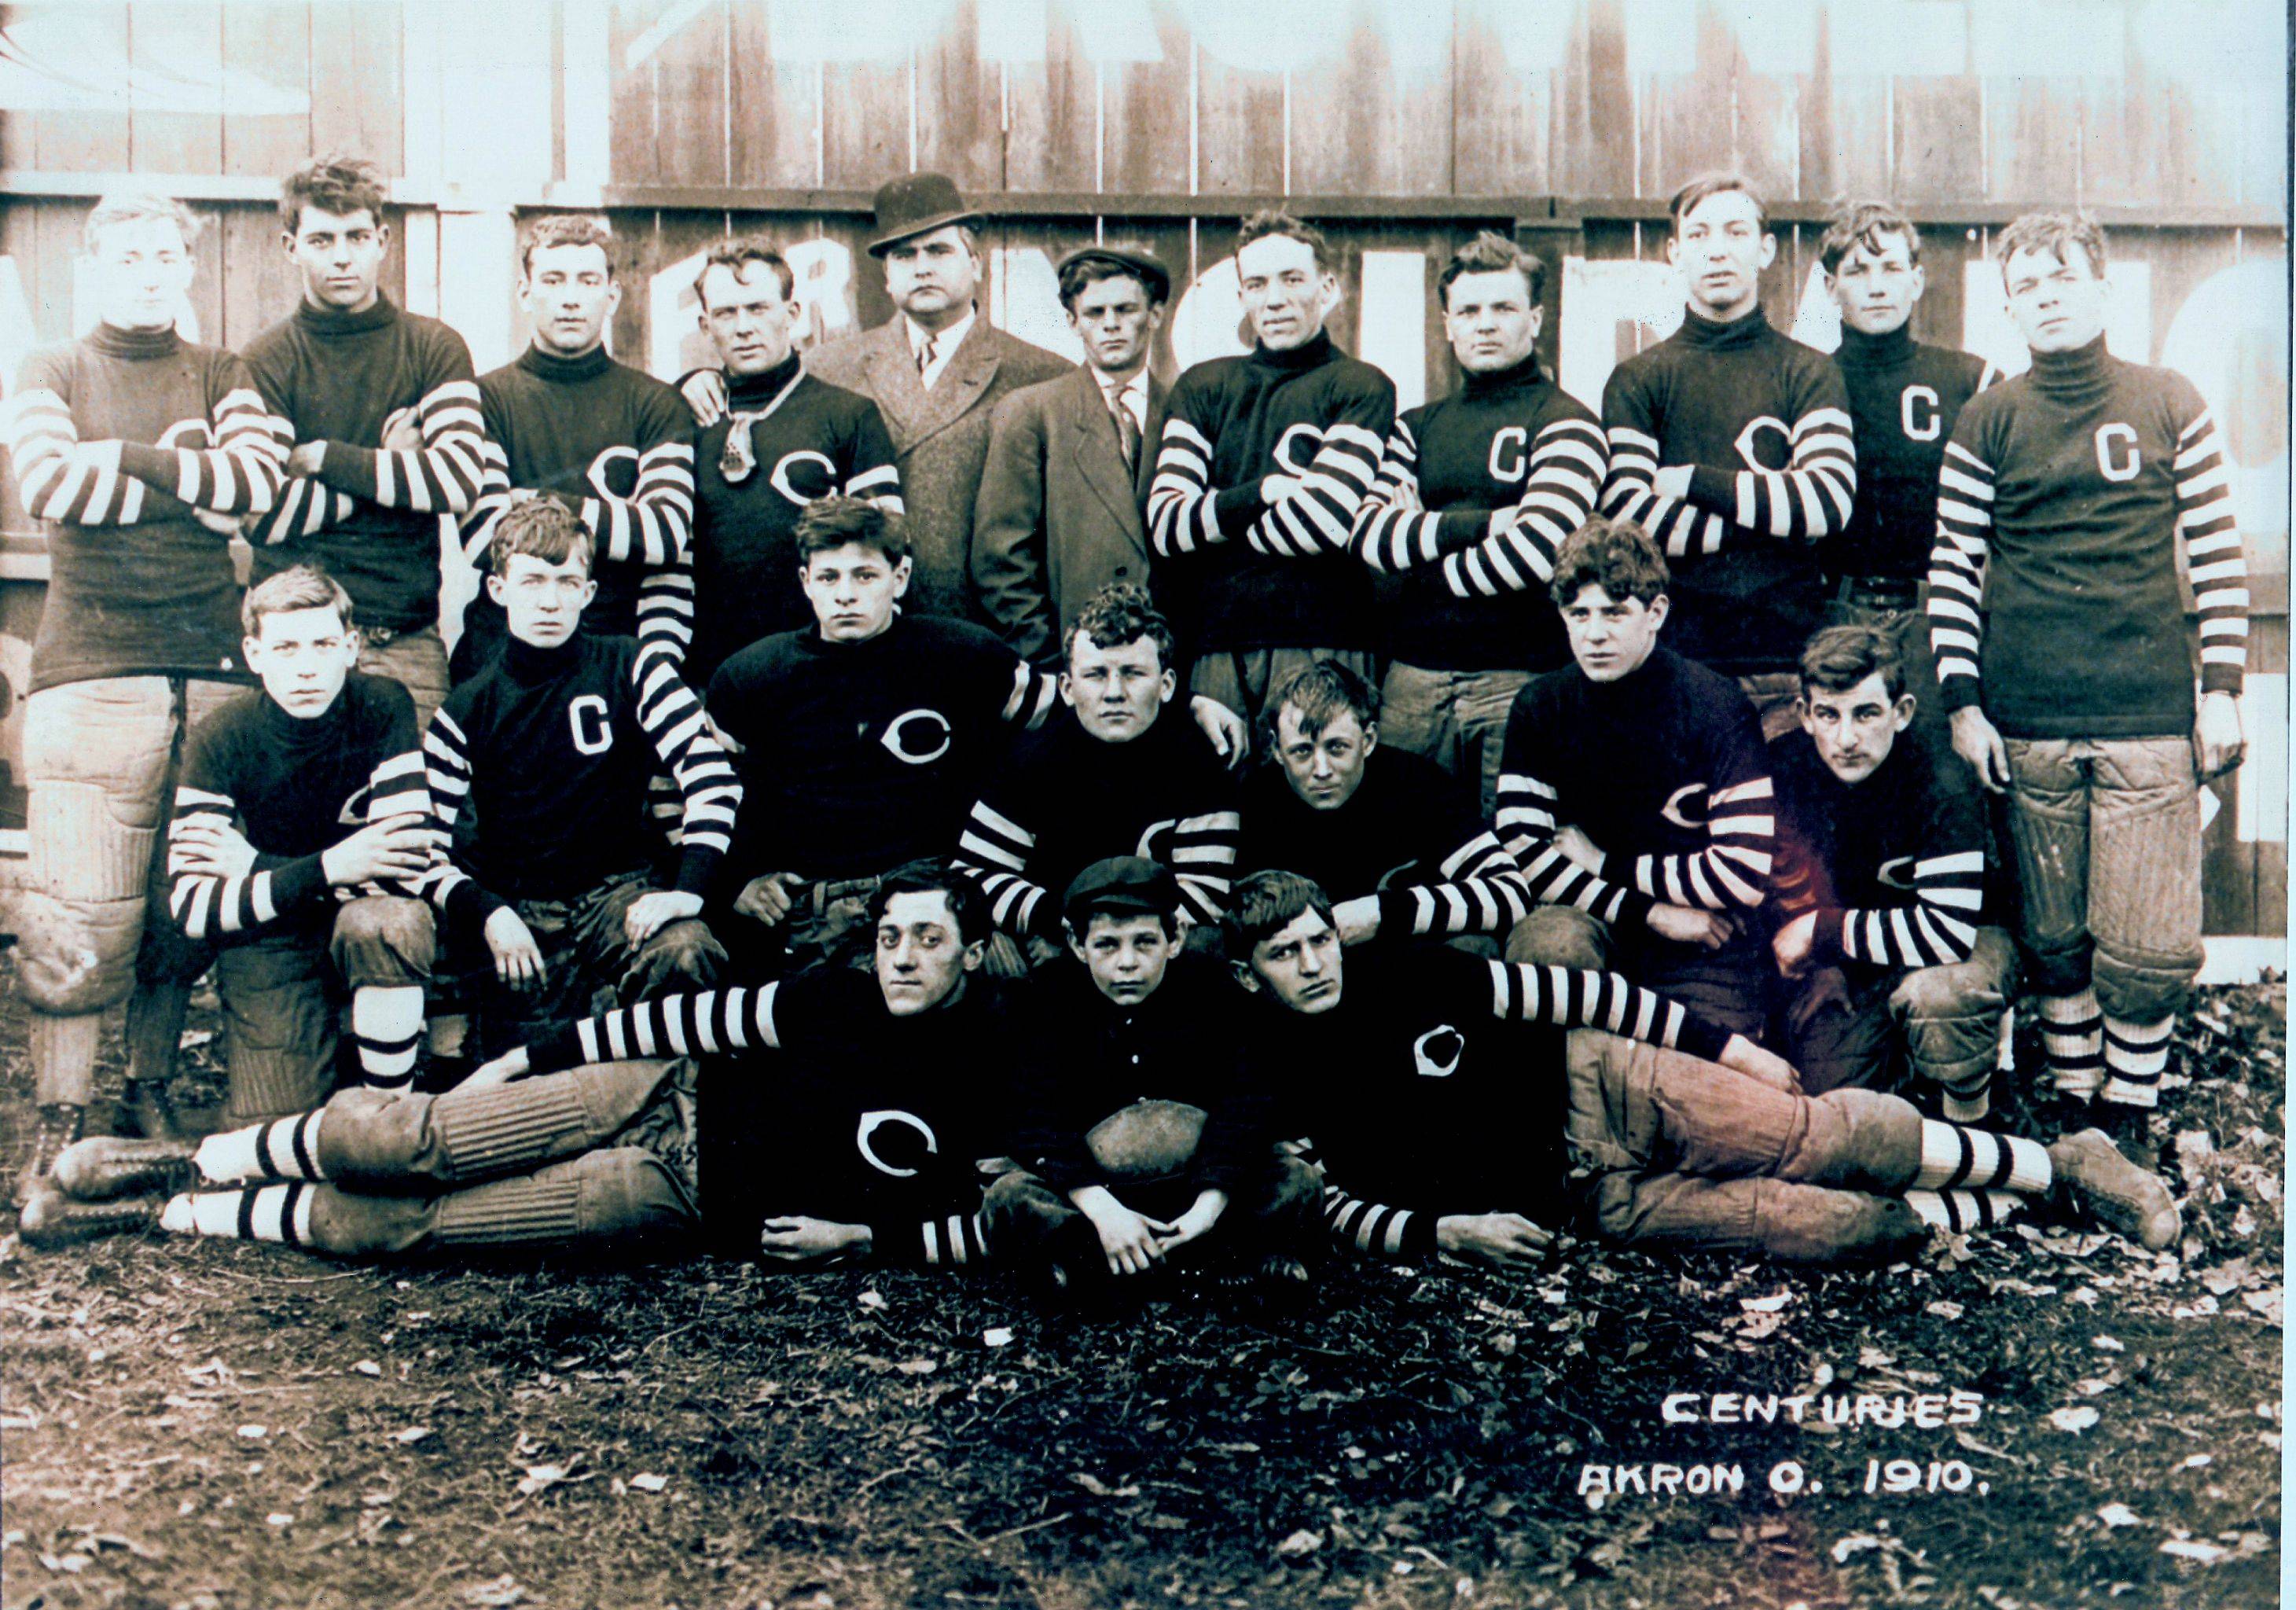 One of the first Pro Football teams- The Akron Ohio "Centuries" in 1910